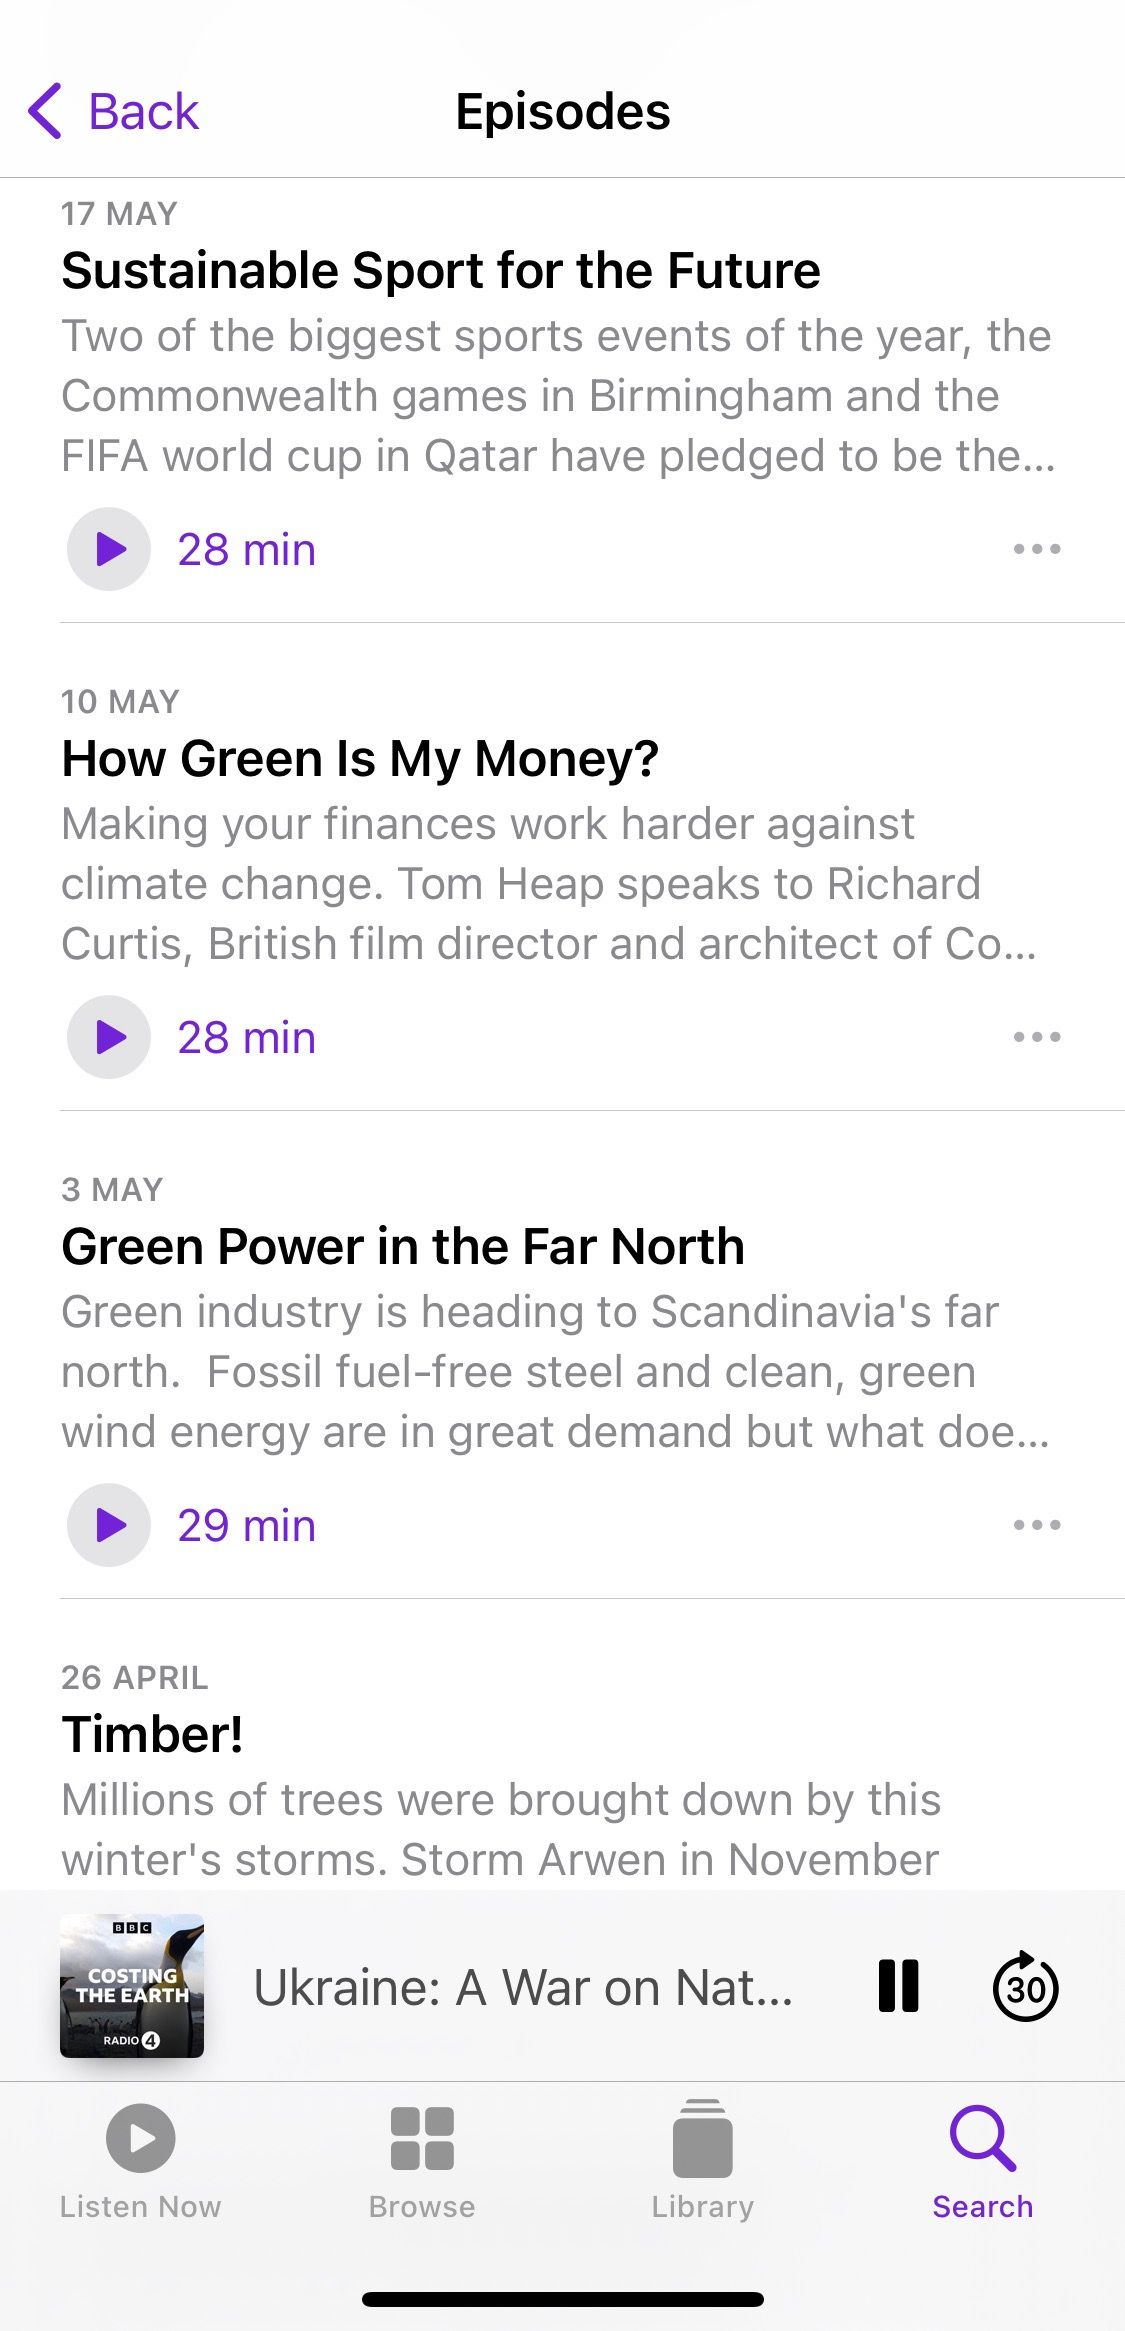 Screenshot showing Costing the Earth podcast sample episodes